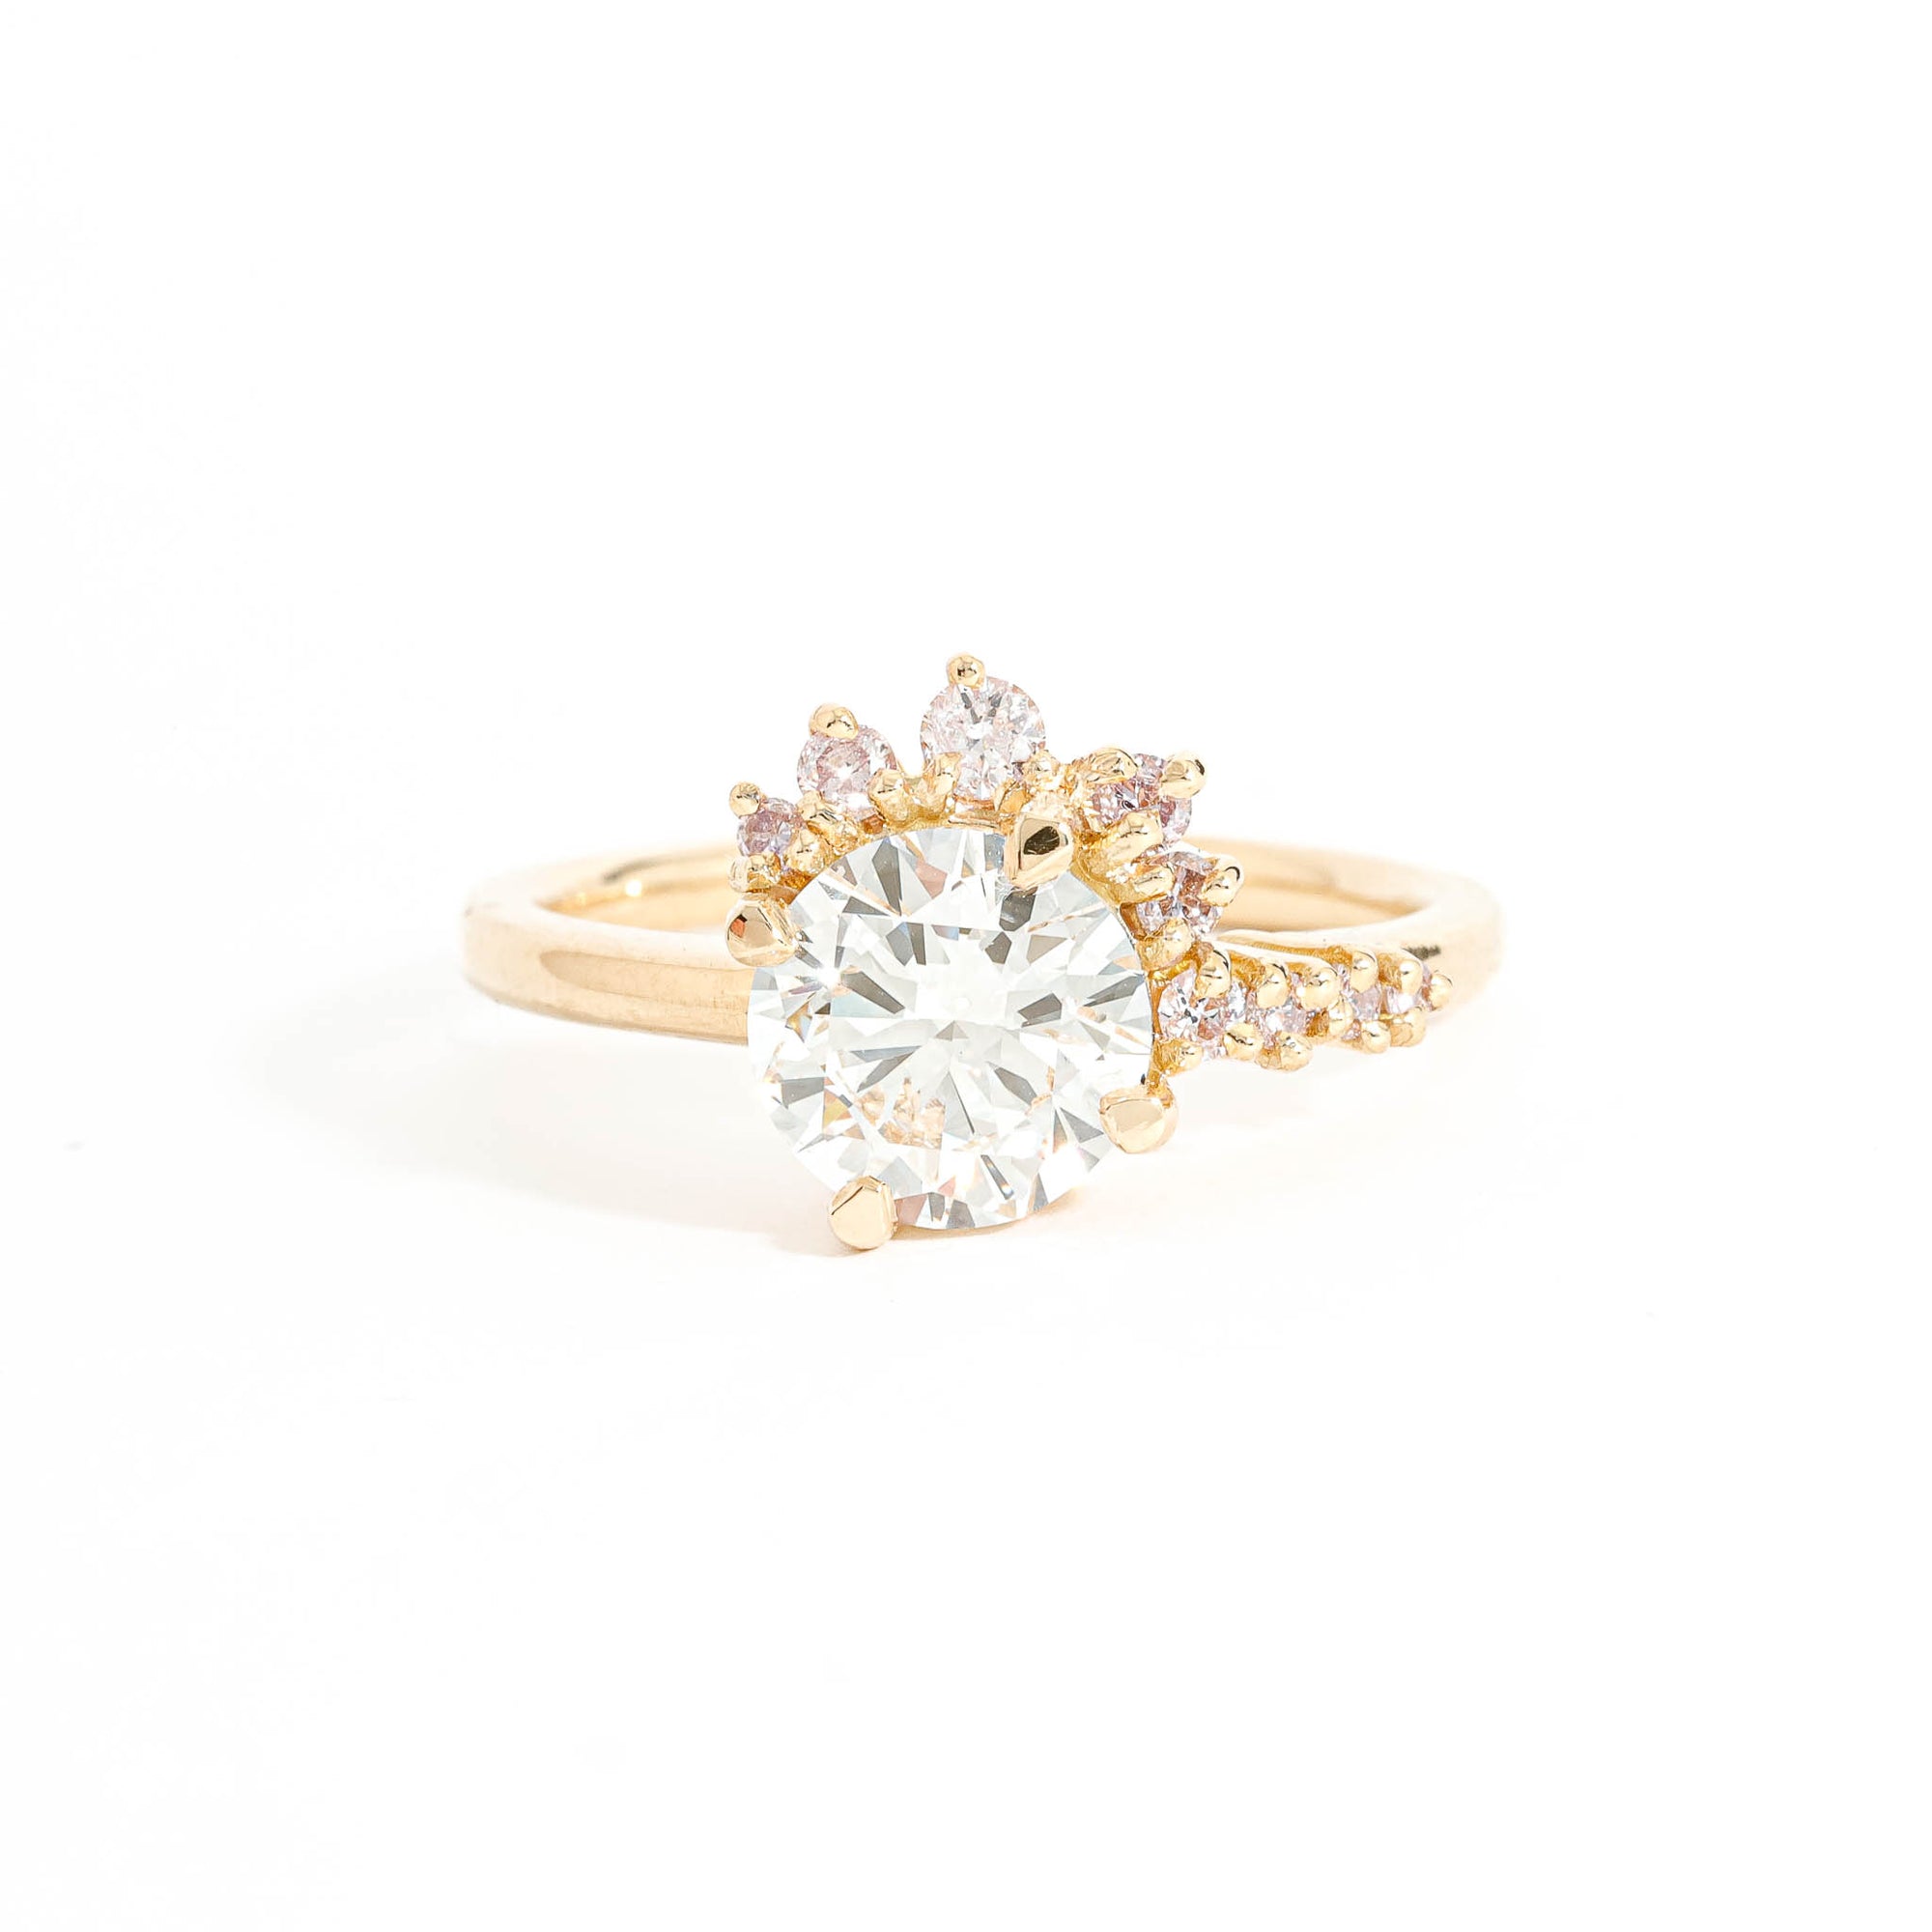 Round Brilliant Cut White and Pink Diamond Half Halo Ring in 18 Carat Yellow Gold Round Brilliant Cut White and Pink Diamond Half Halo Ring in 18 Carat Yellow Gold